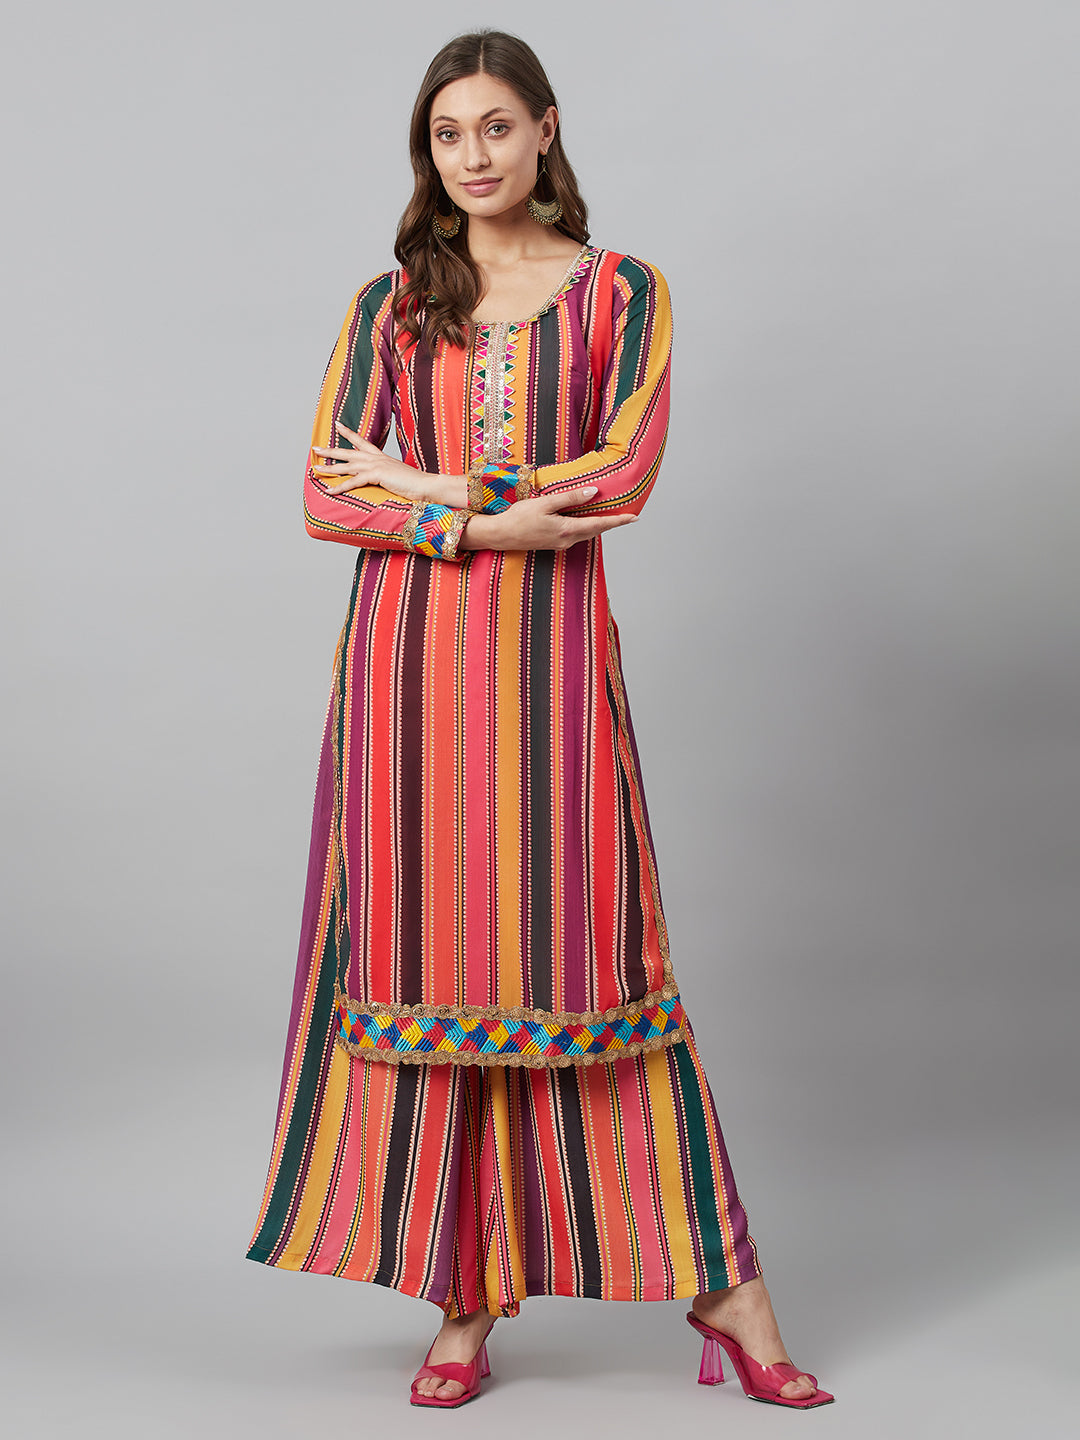 Women's Multicolor Printed Kurta With Lace Details - Aks